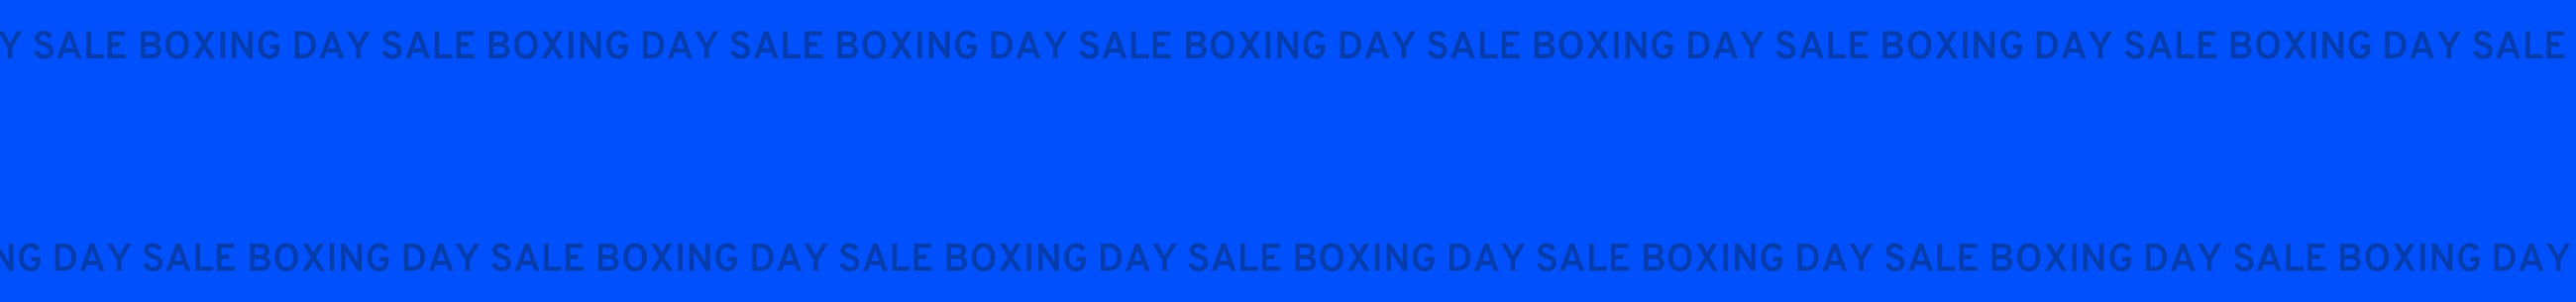 Boxing Day collection image